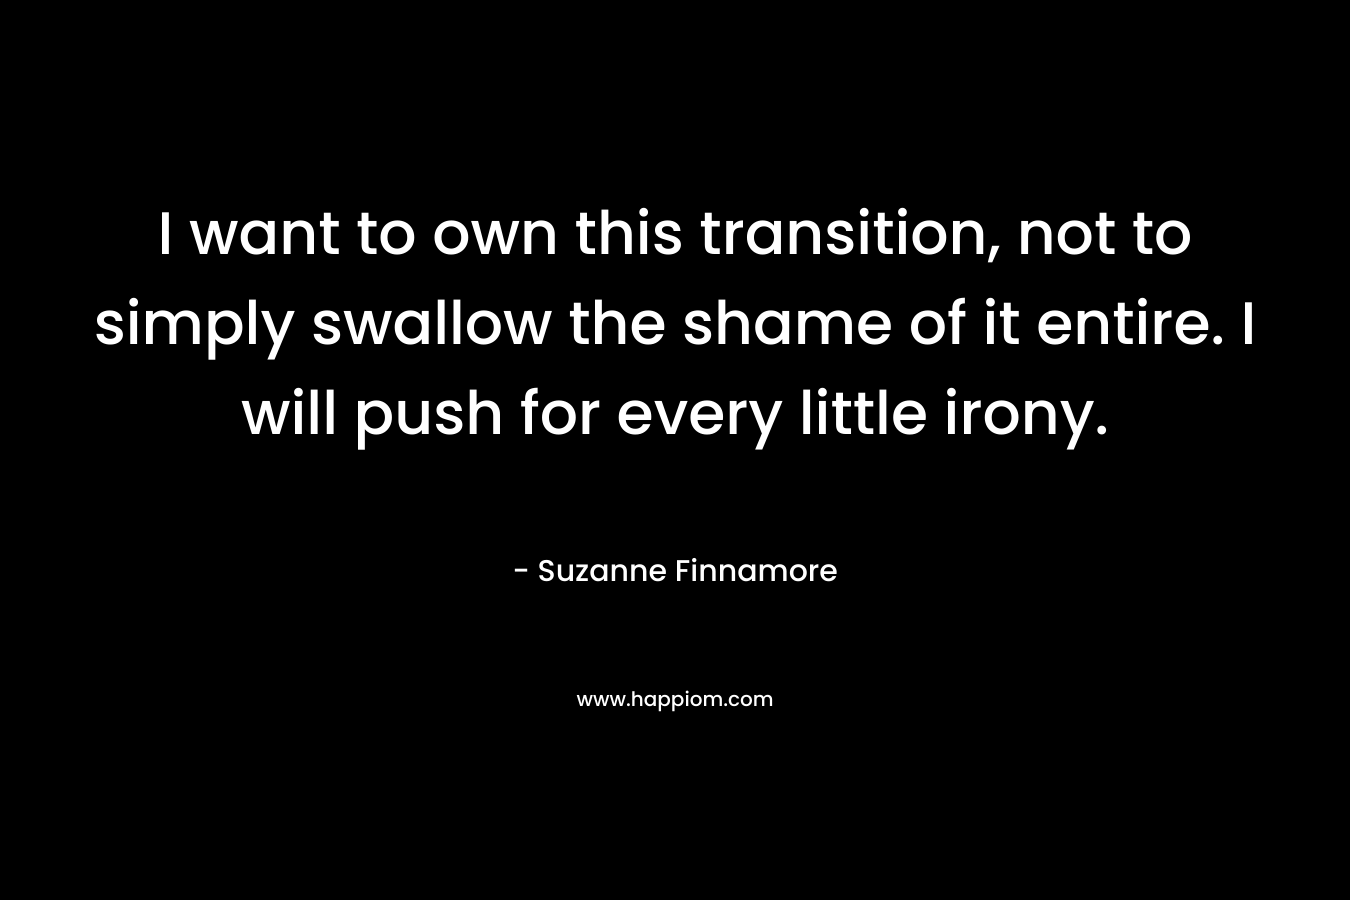 I want to own this transition, not to simply swallow the shame of it entire. I will push for every little irony. – Suzanne Finnamore